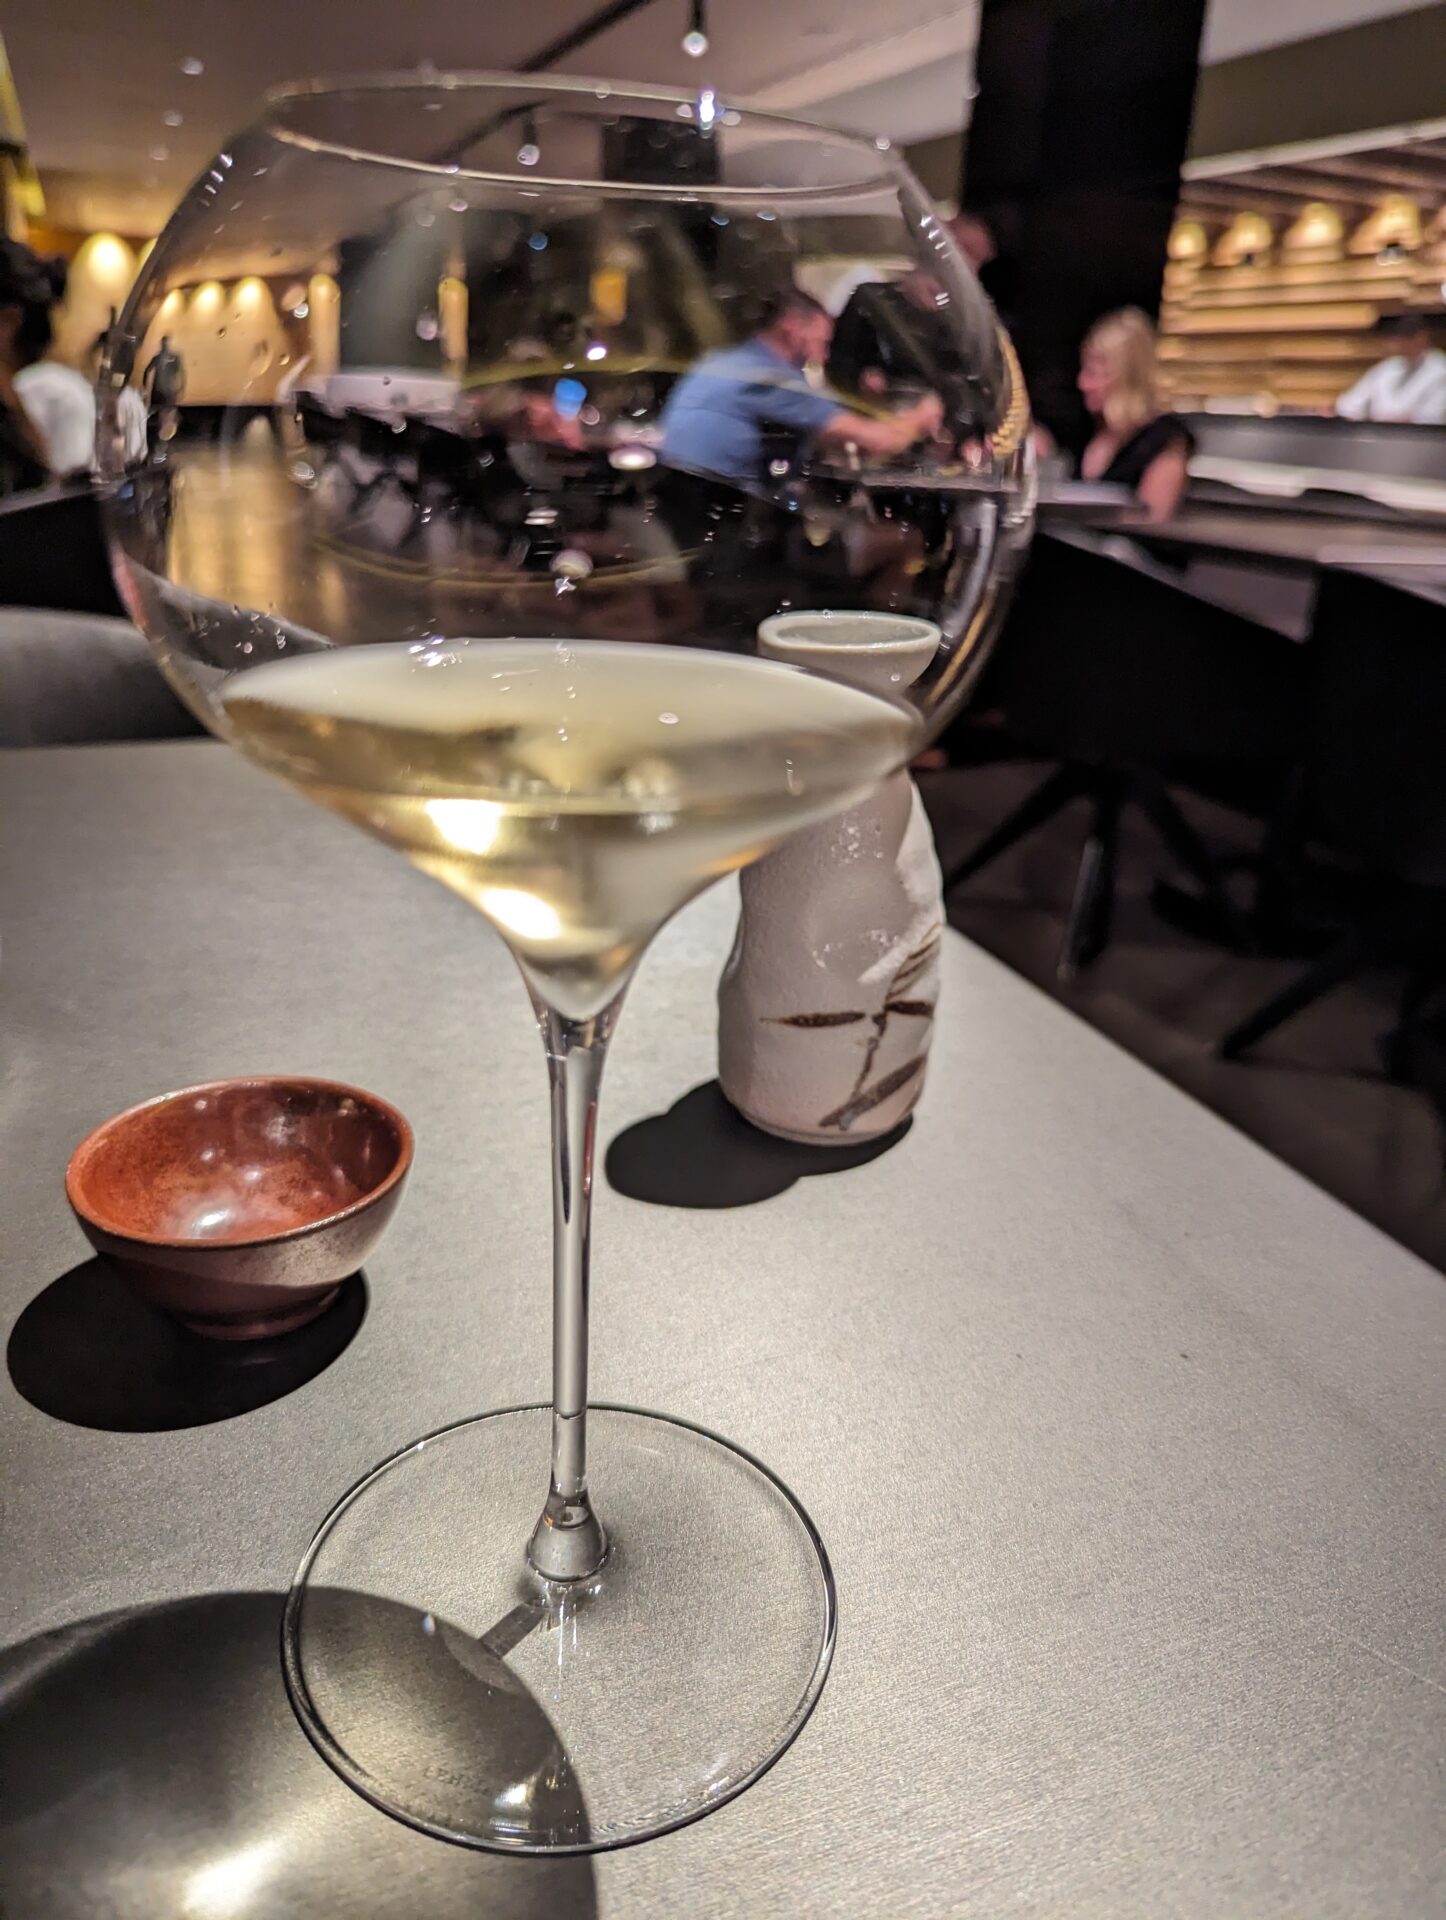 a glass of white wine on a table